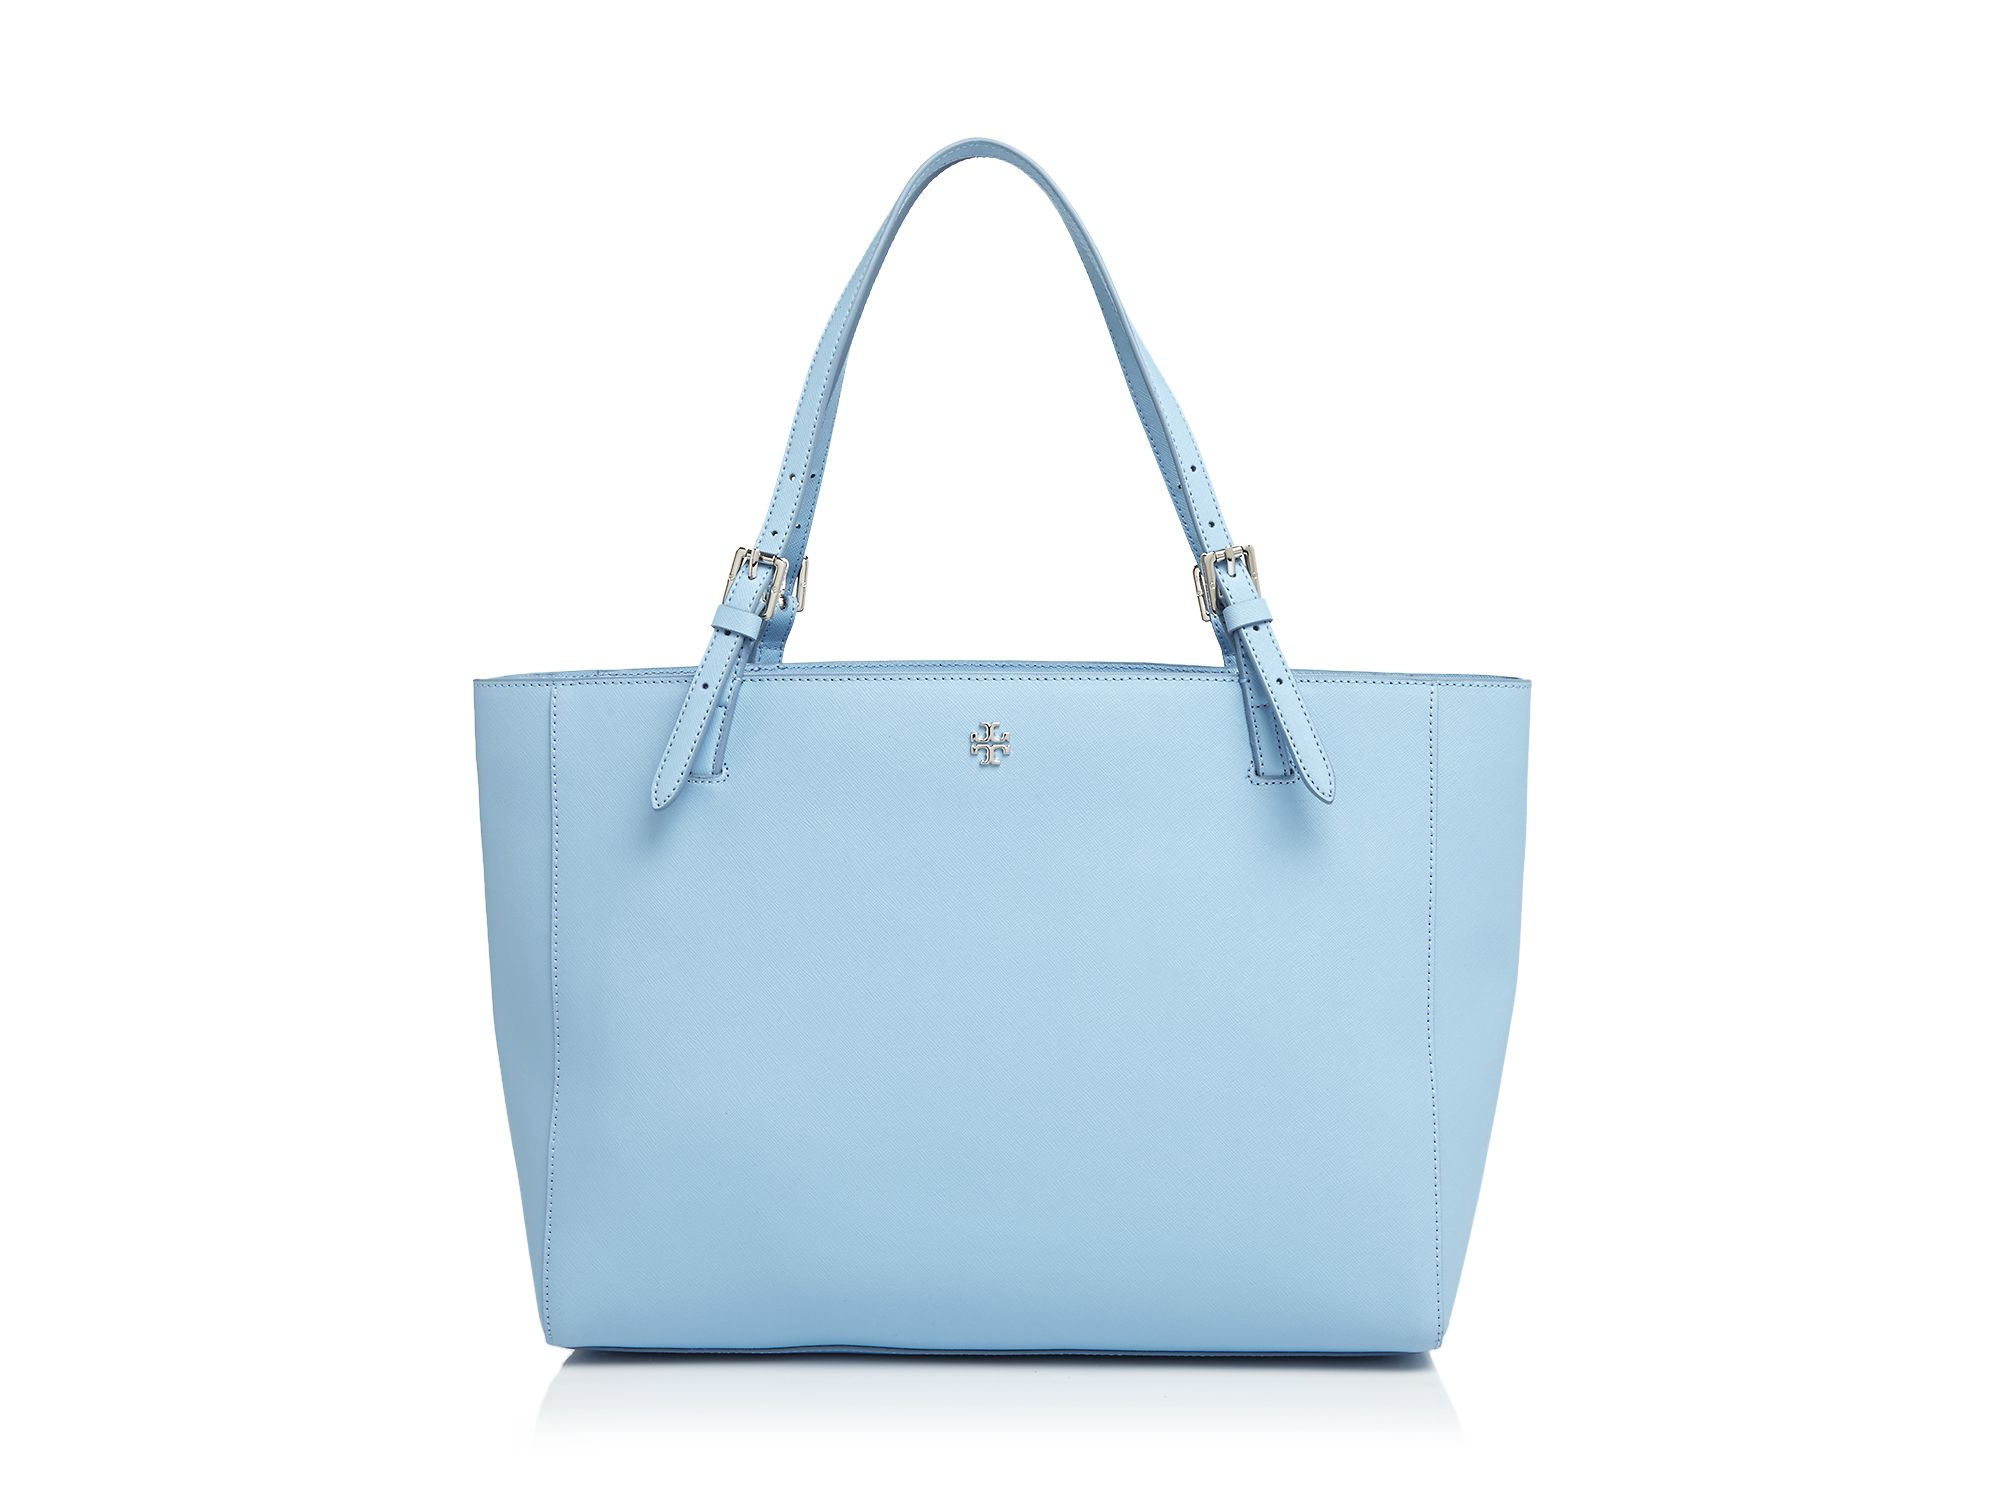 Tory Burch Tote - York Buckle in Blue - Lyst